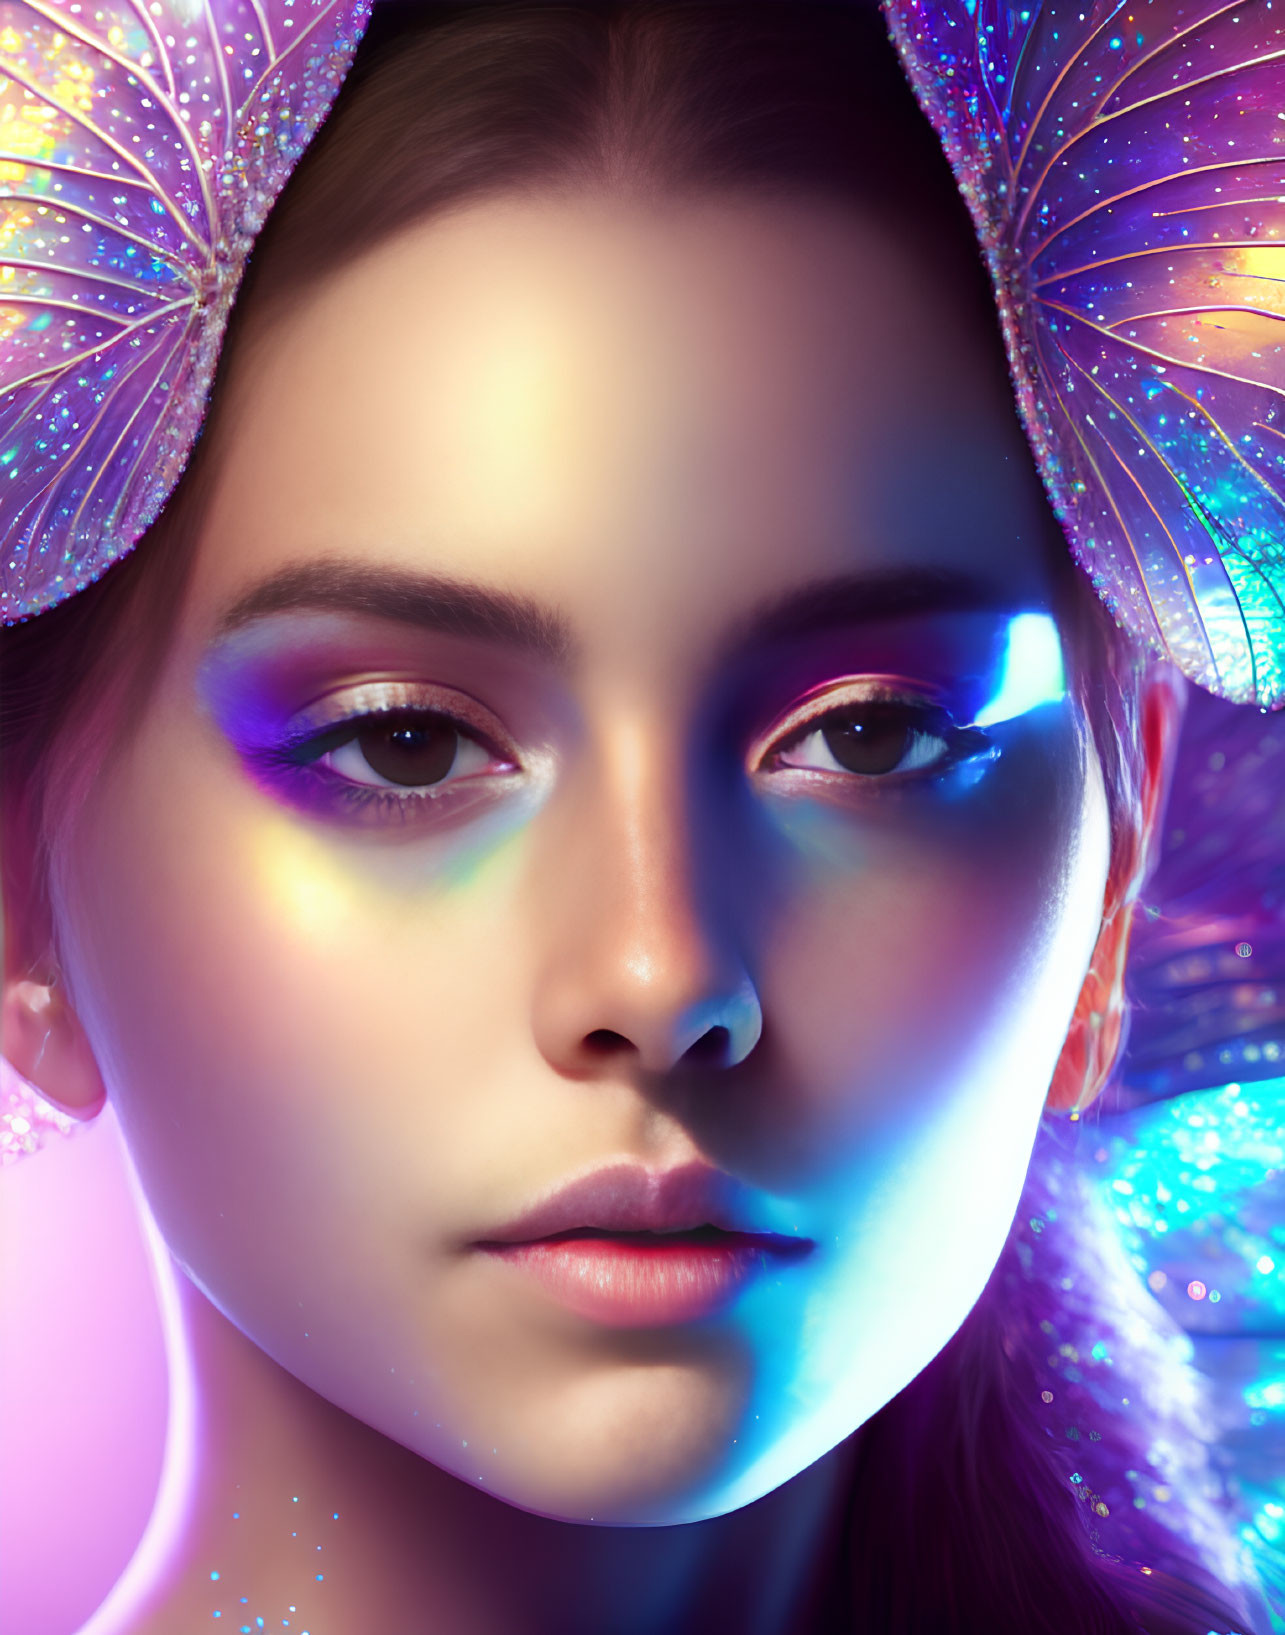 Colorful Glowing Makeup and Fan Accessories Portrait